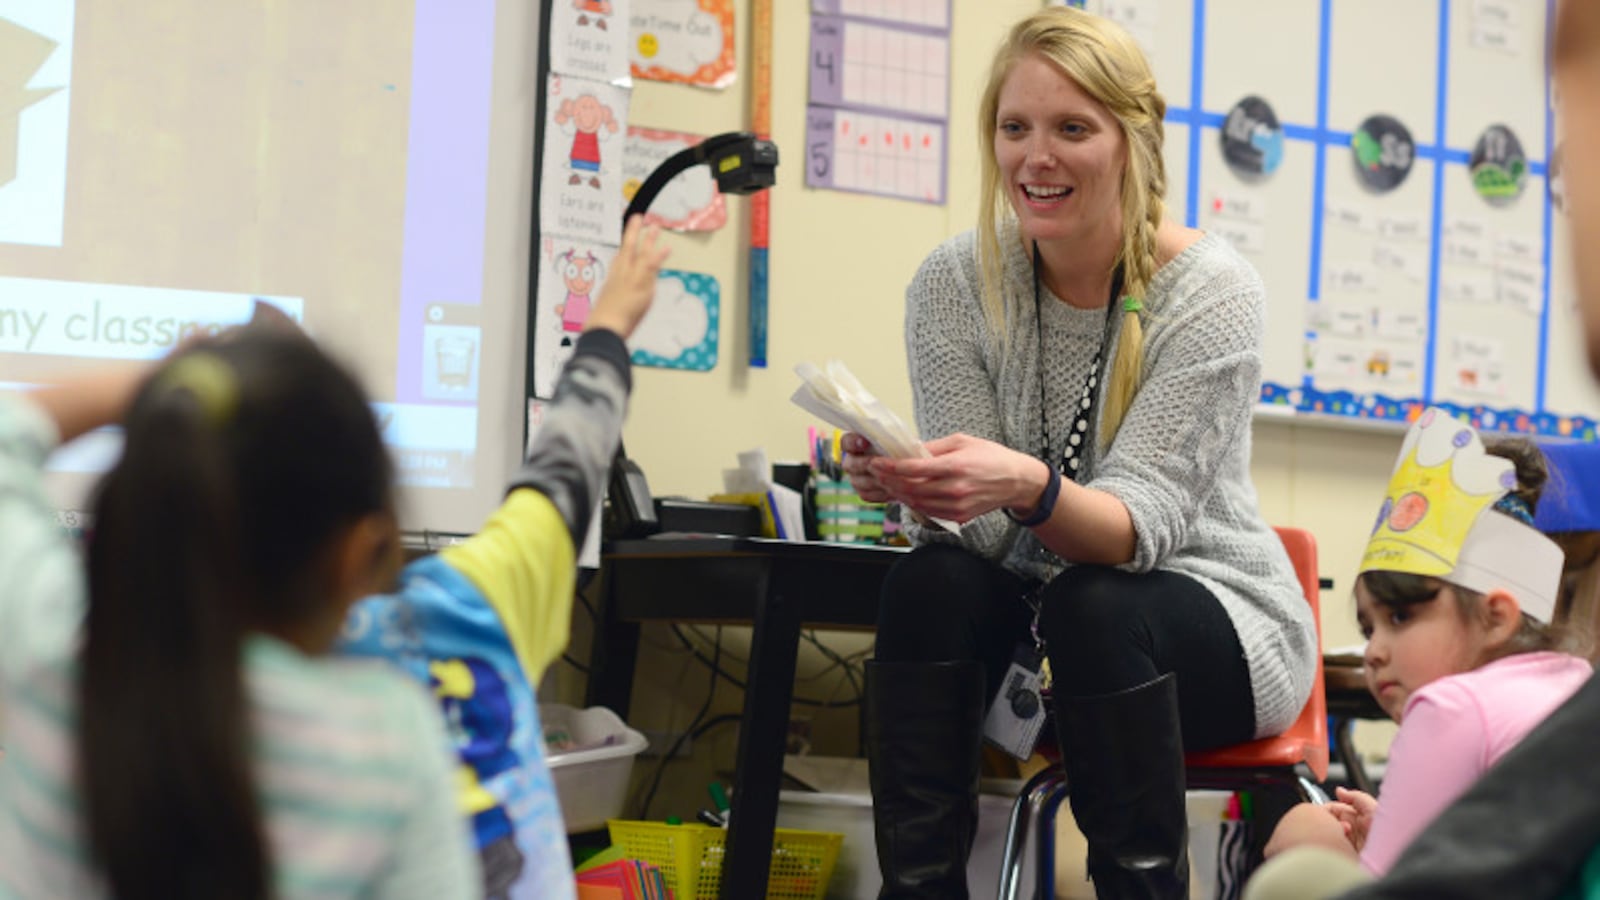 Jordan Crosby and her students in her kindergarten class at Crawford Elementary on February 17, 2016 in Aurora, Colorado. (Photo by Brent Lewis/The Denver Post)